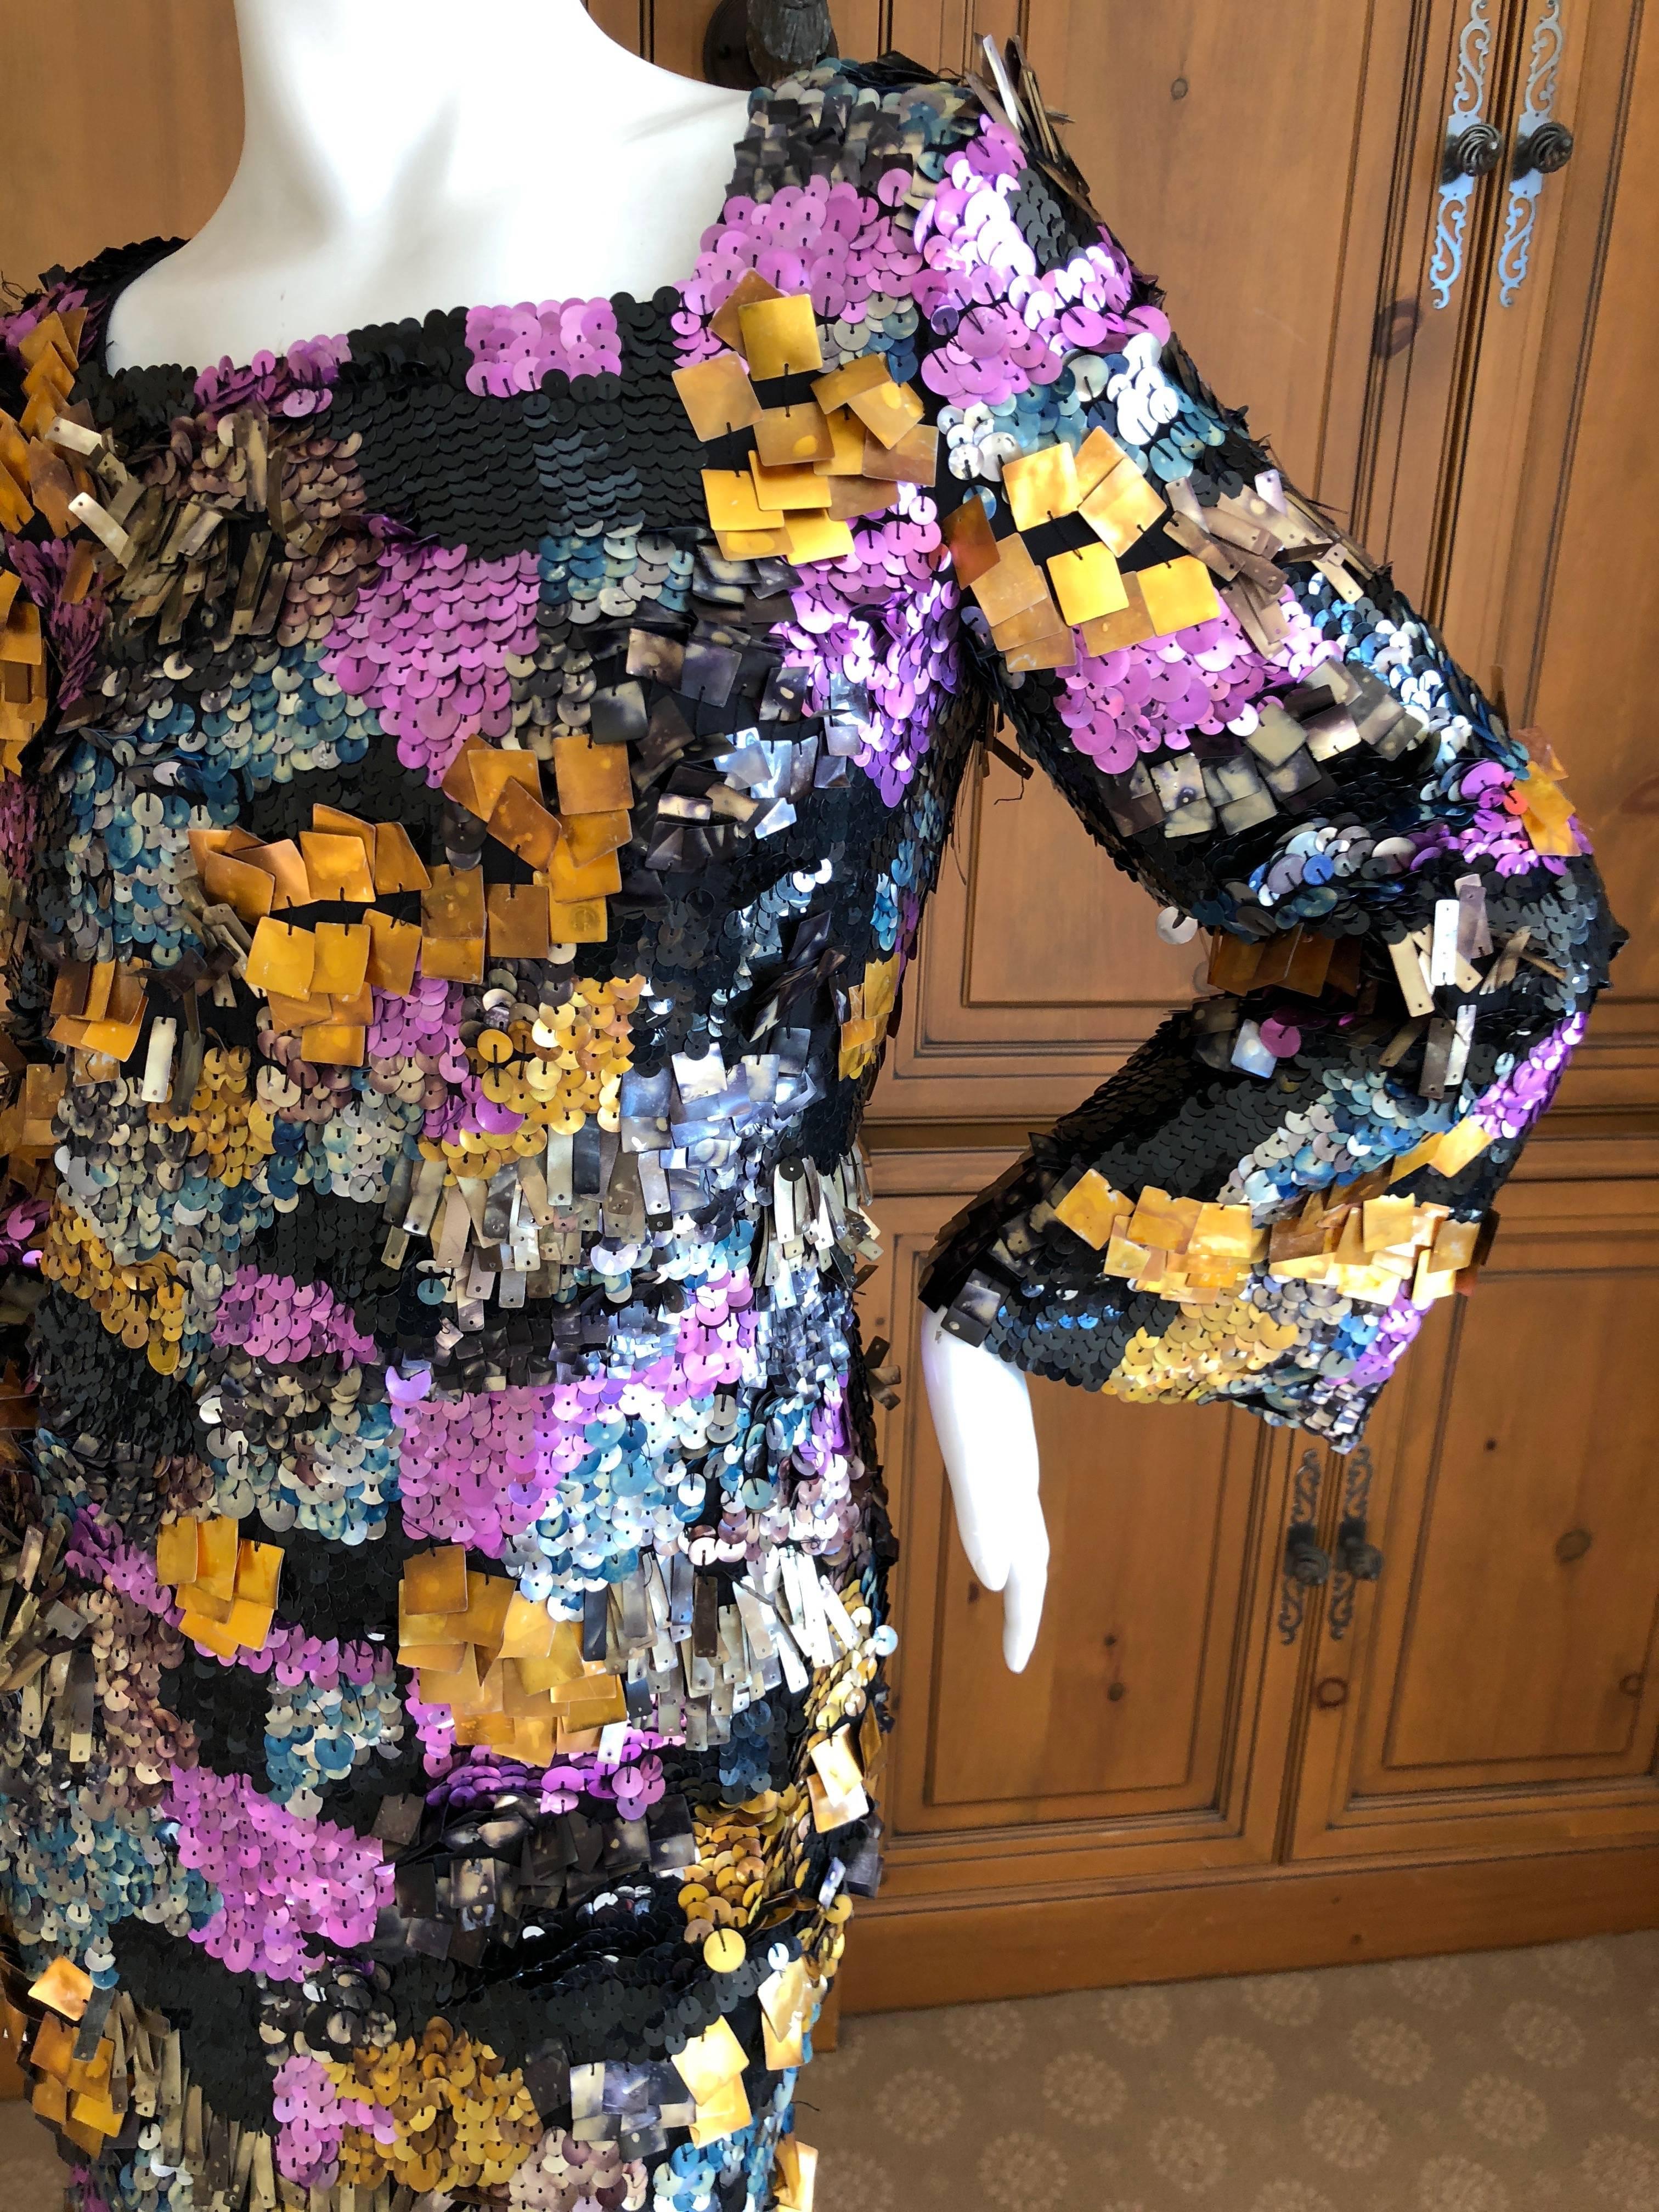 Incredible cocktail dress from Emilio Pucci.
Fully covered with different sequins and pallets, simply astonishing.
Size 40  / 10
Bust 38